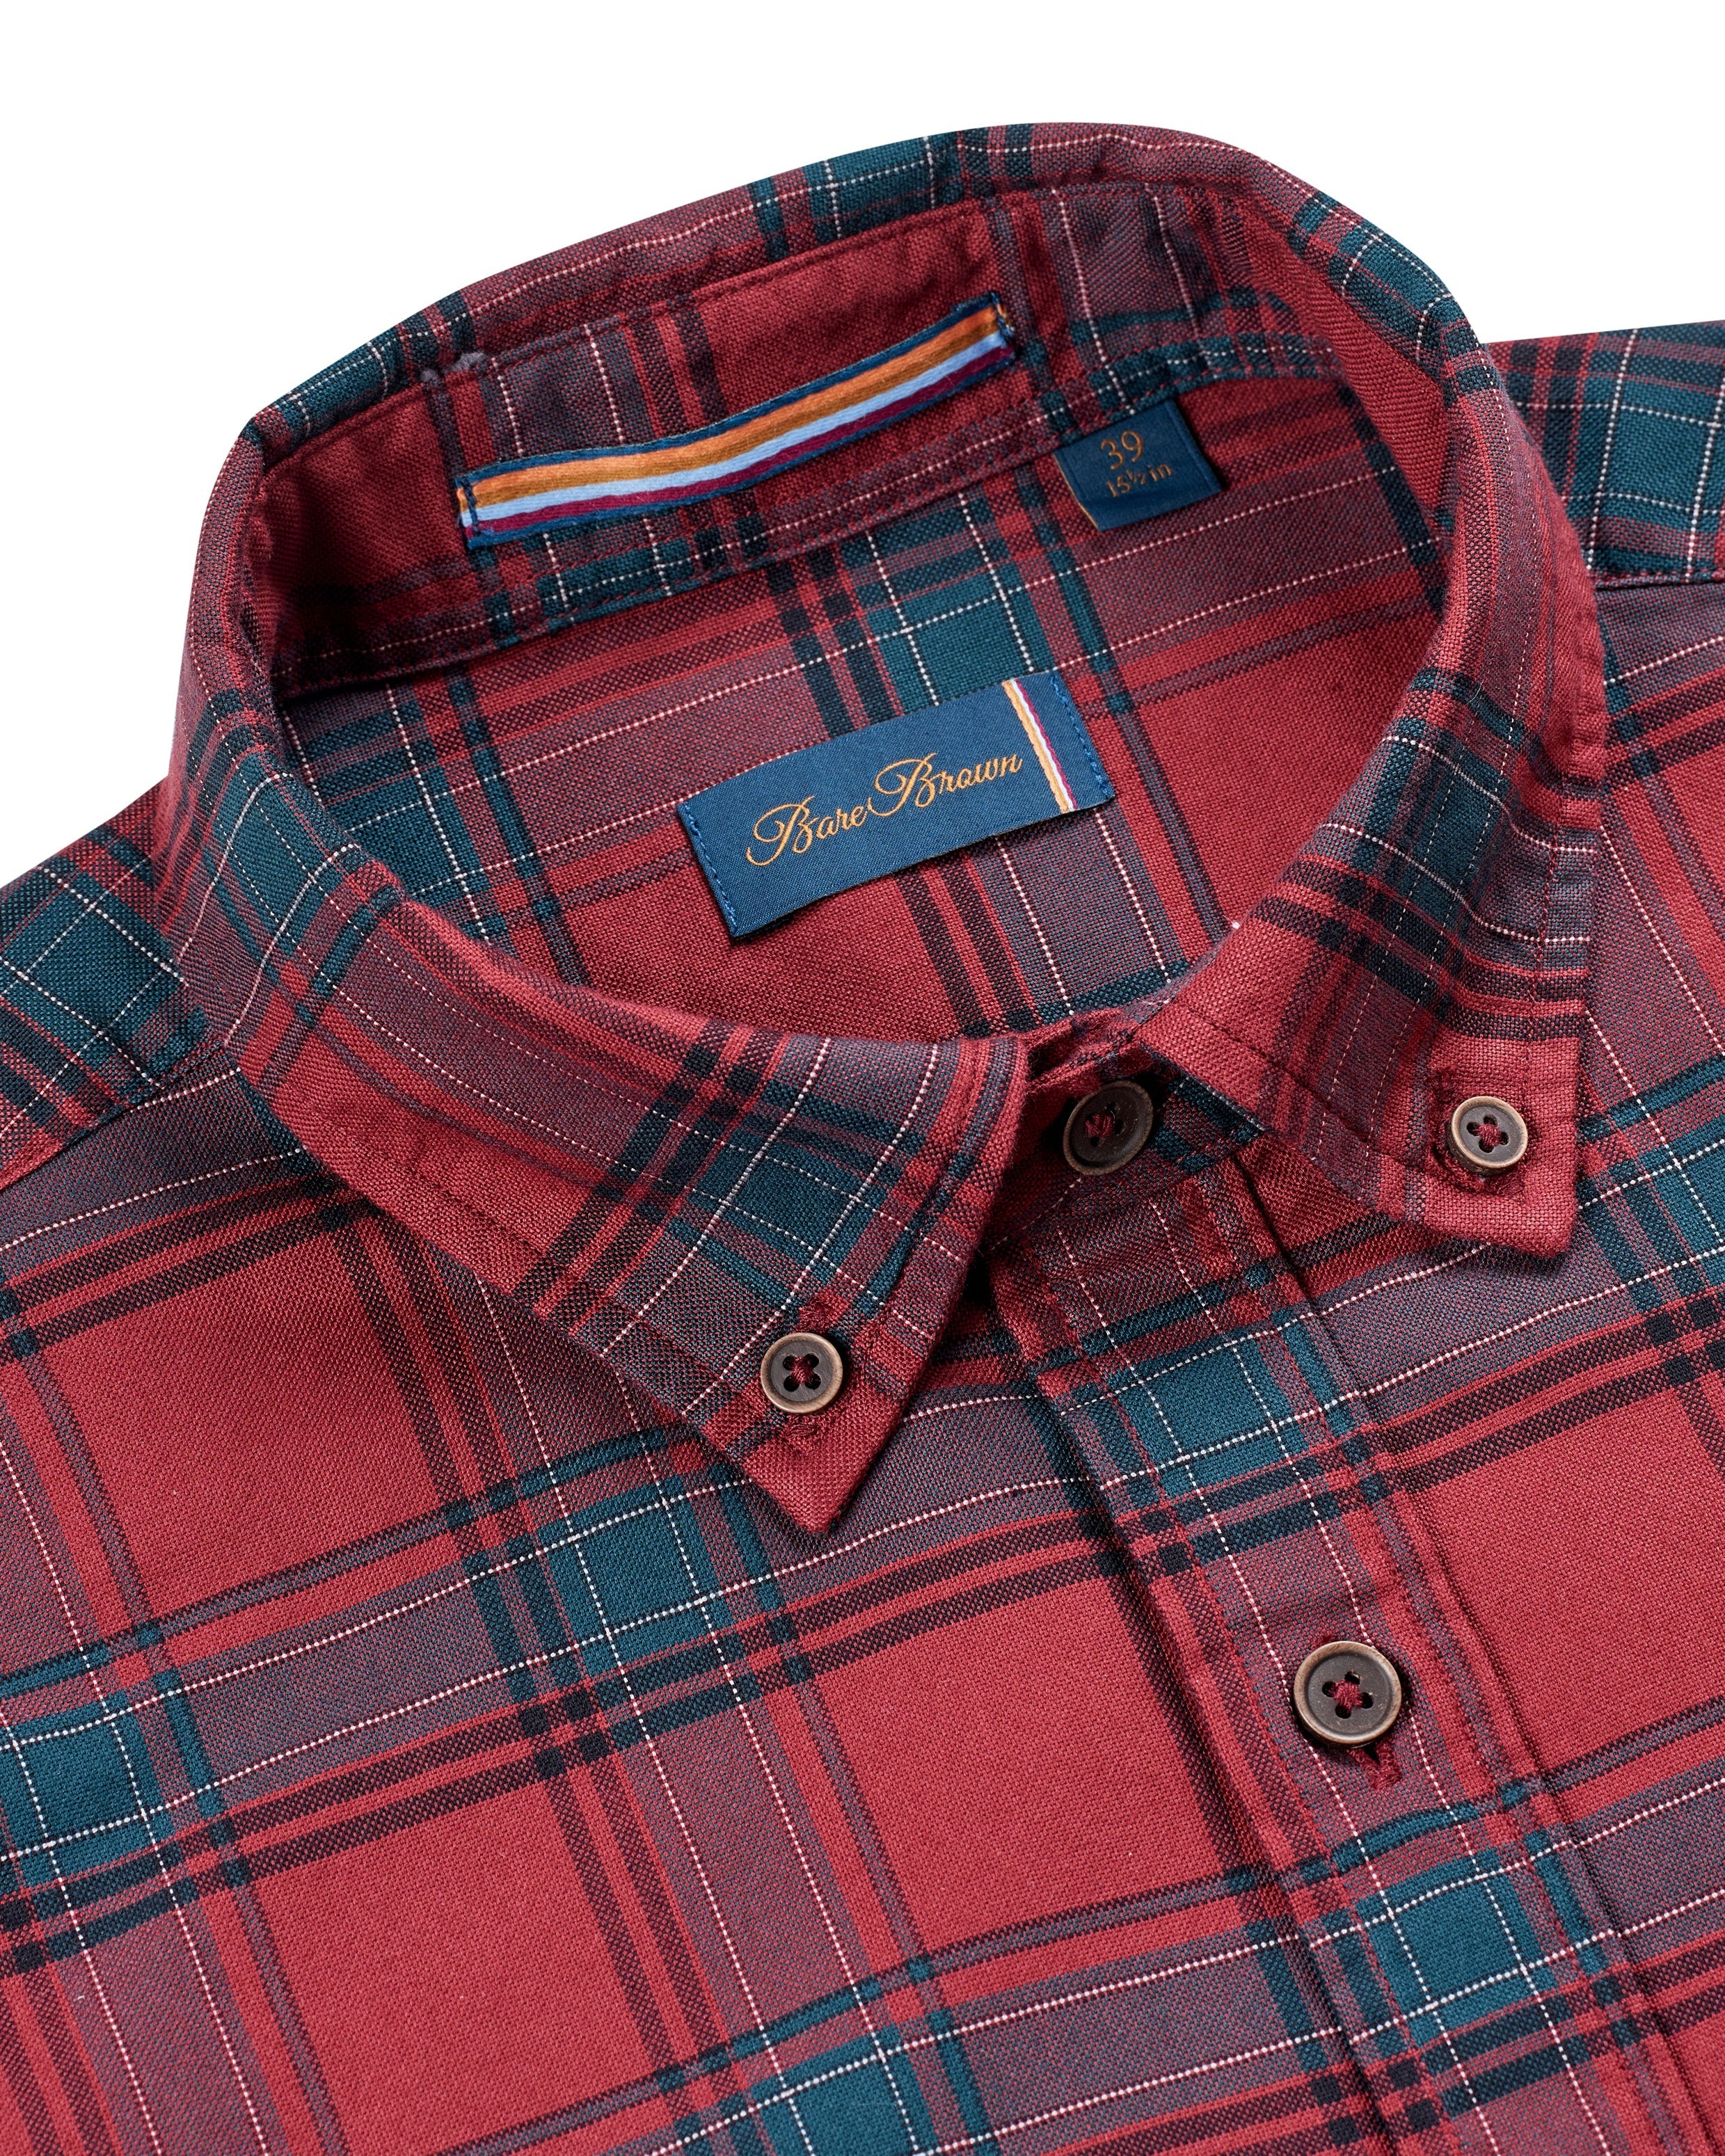 Bare Brown Checkered Cotton Spandex Shirt, Slim Fit with Full Sleeves - Red